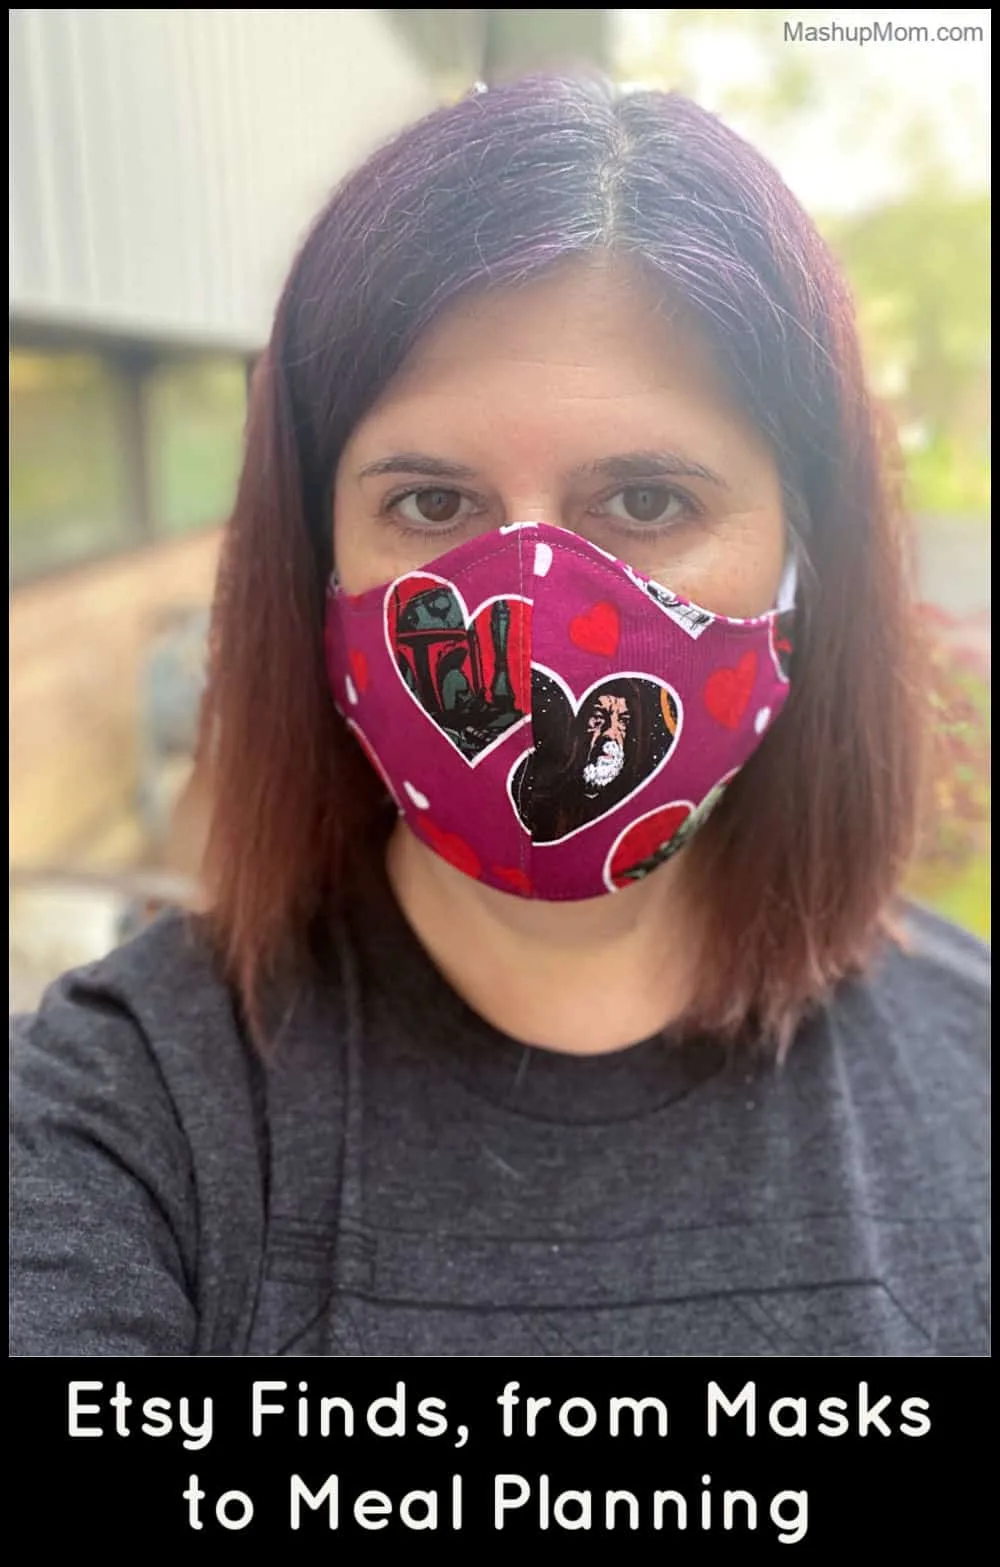 Customized Star Wars face mask from Etsy